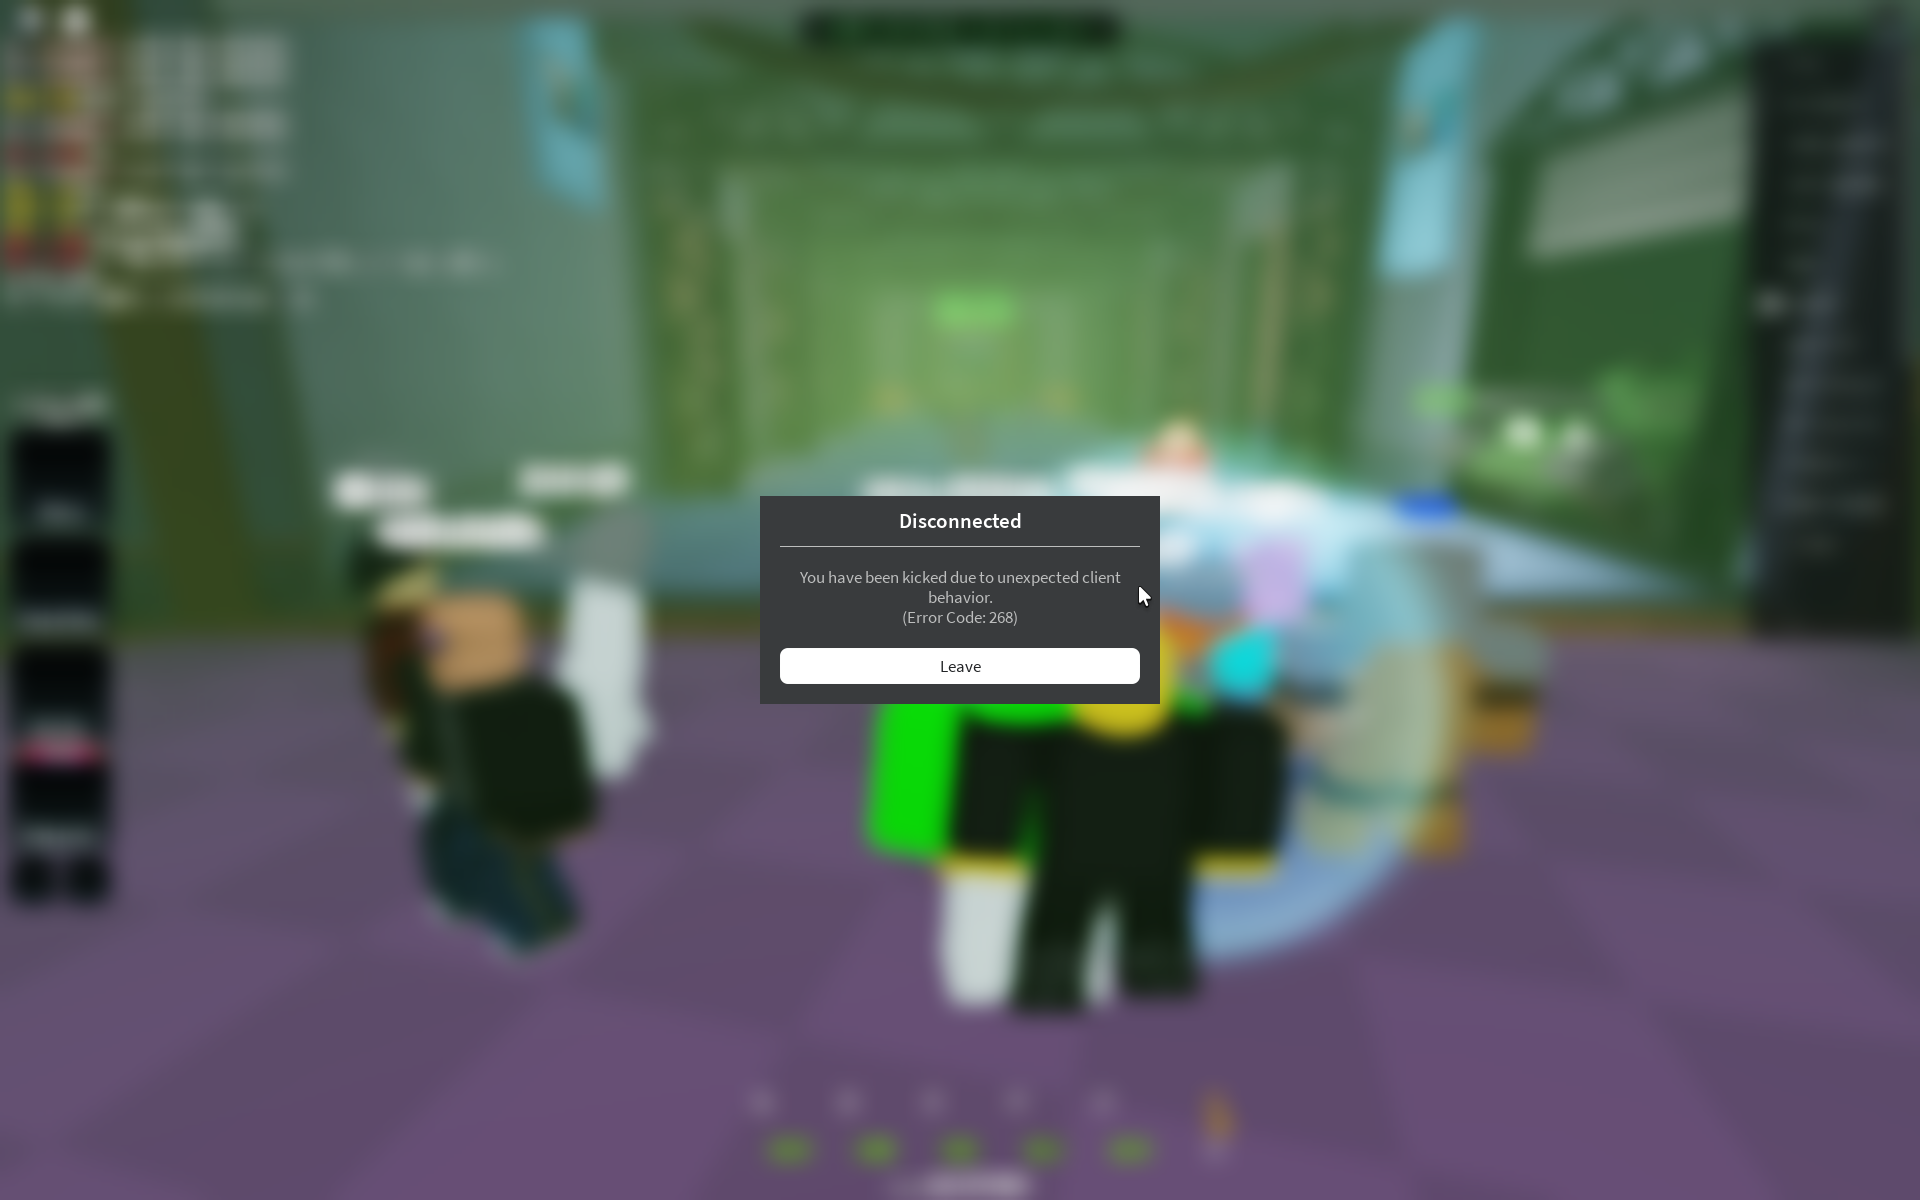 Unexpected Client Error in 'Roblox' Explained